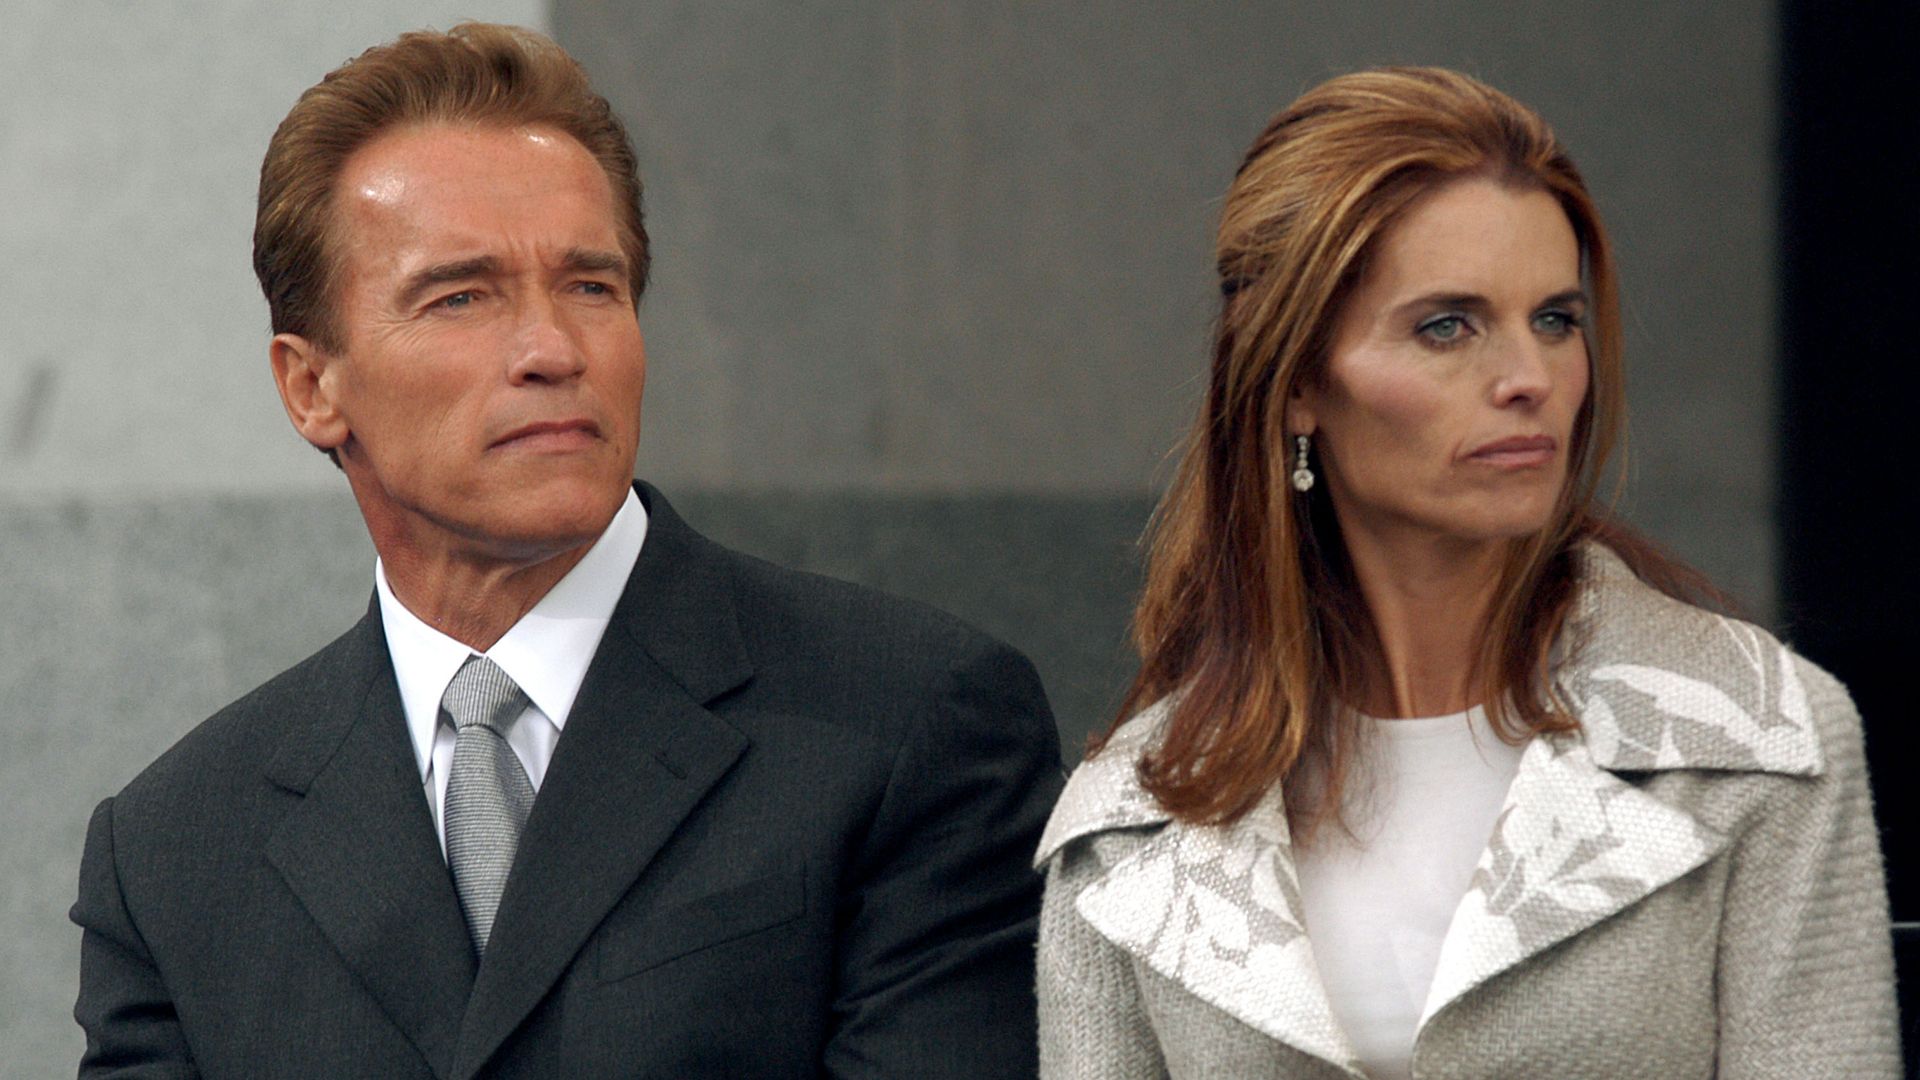 Arnold Schwarzenegger and wife Maria Shjriver after givigng his inaugural address as after being sworn in as California's 38th Governor during a ceremony at the State Capitol in Sacramento